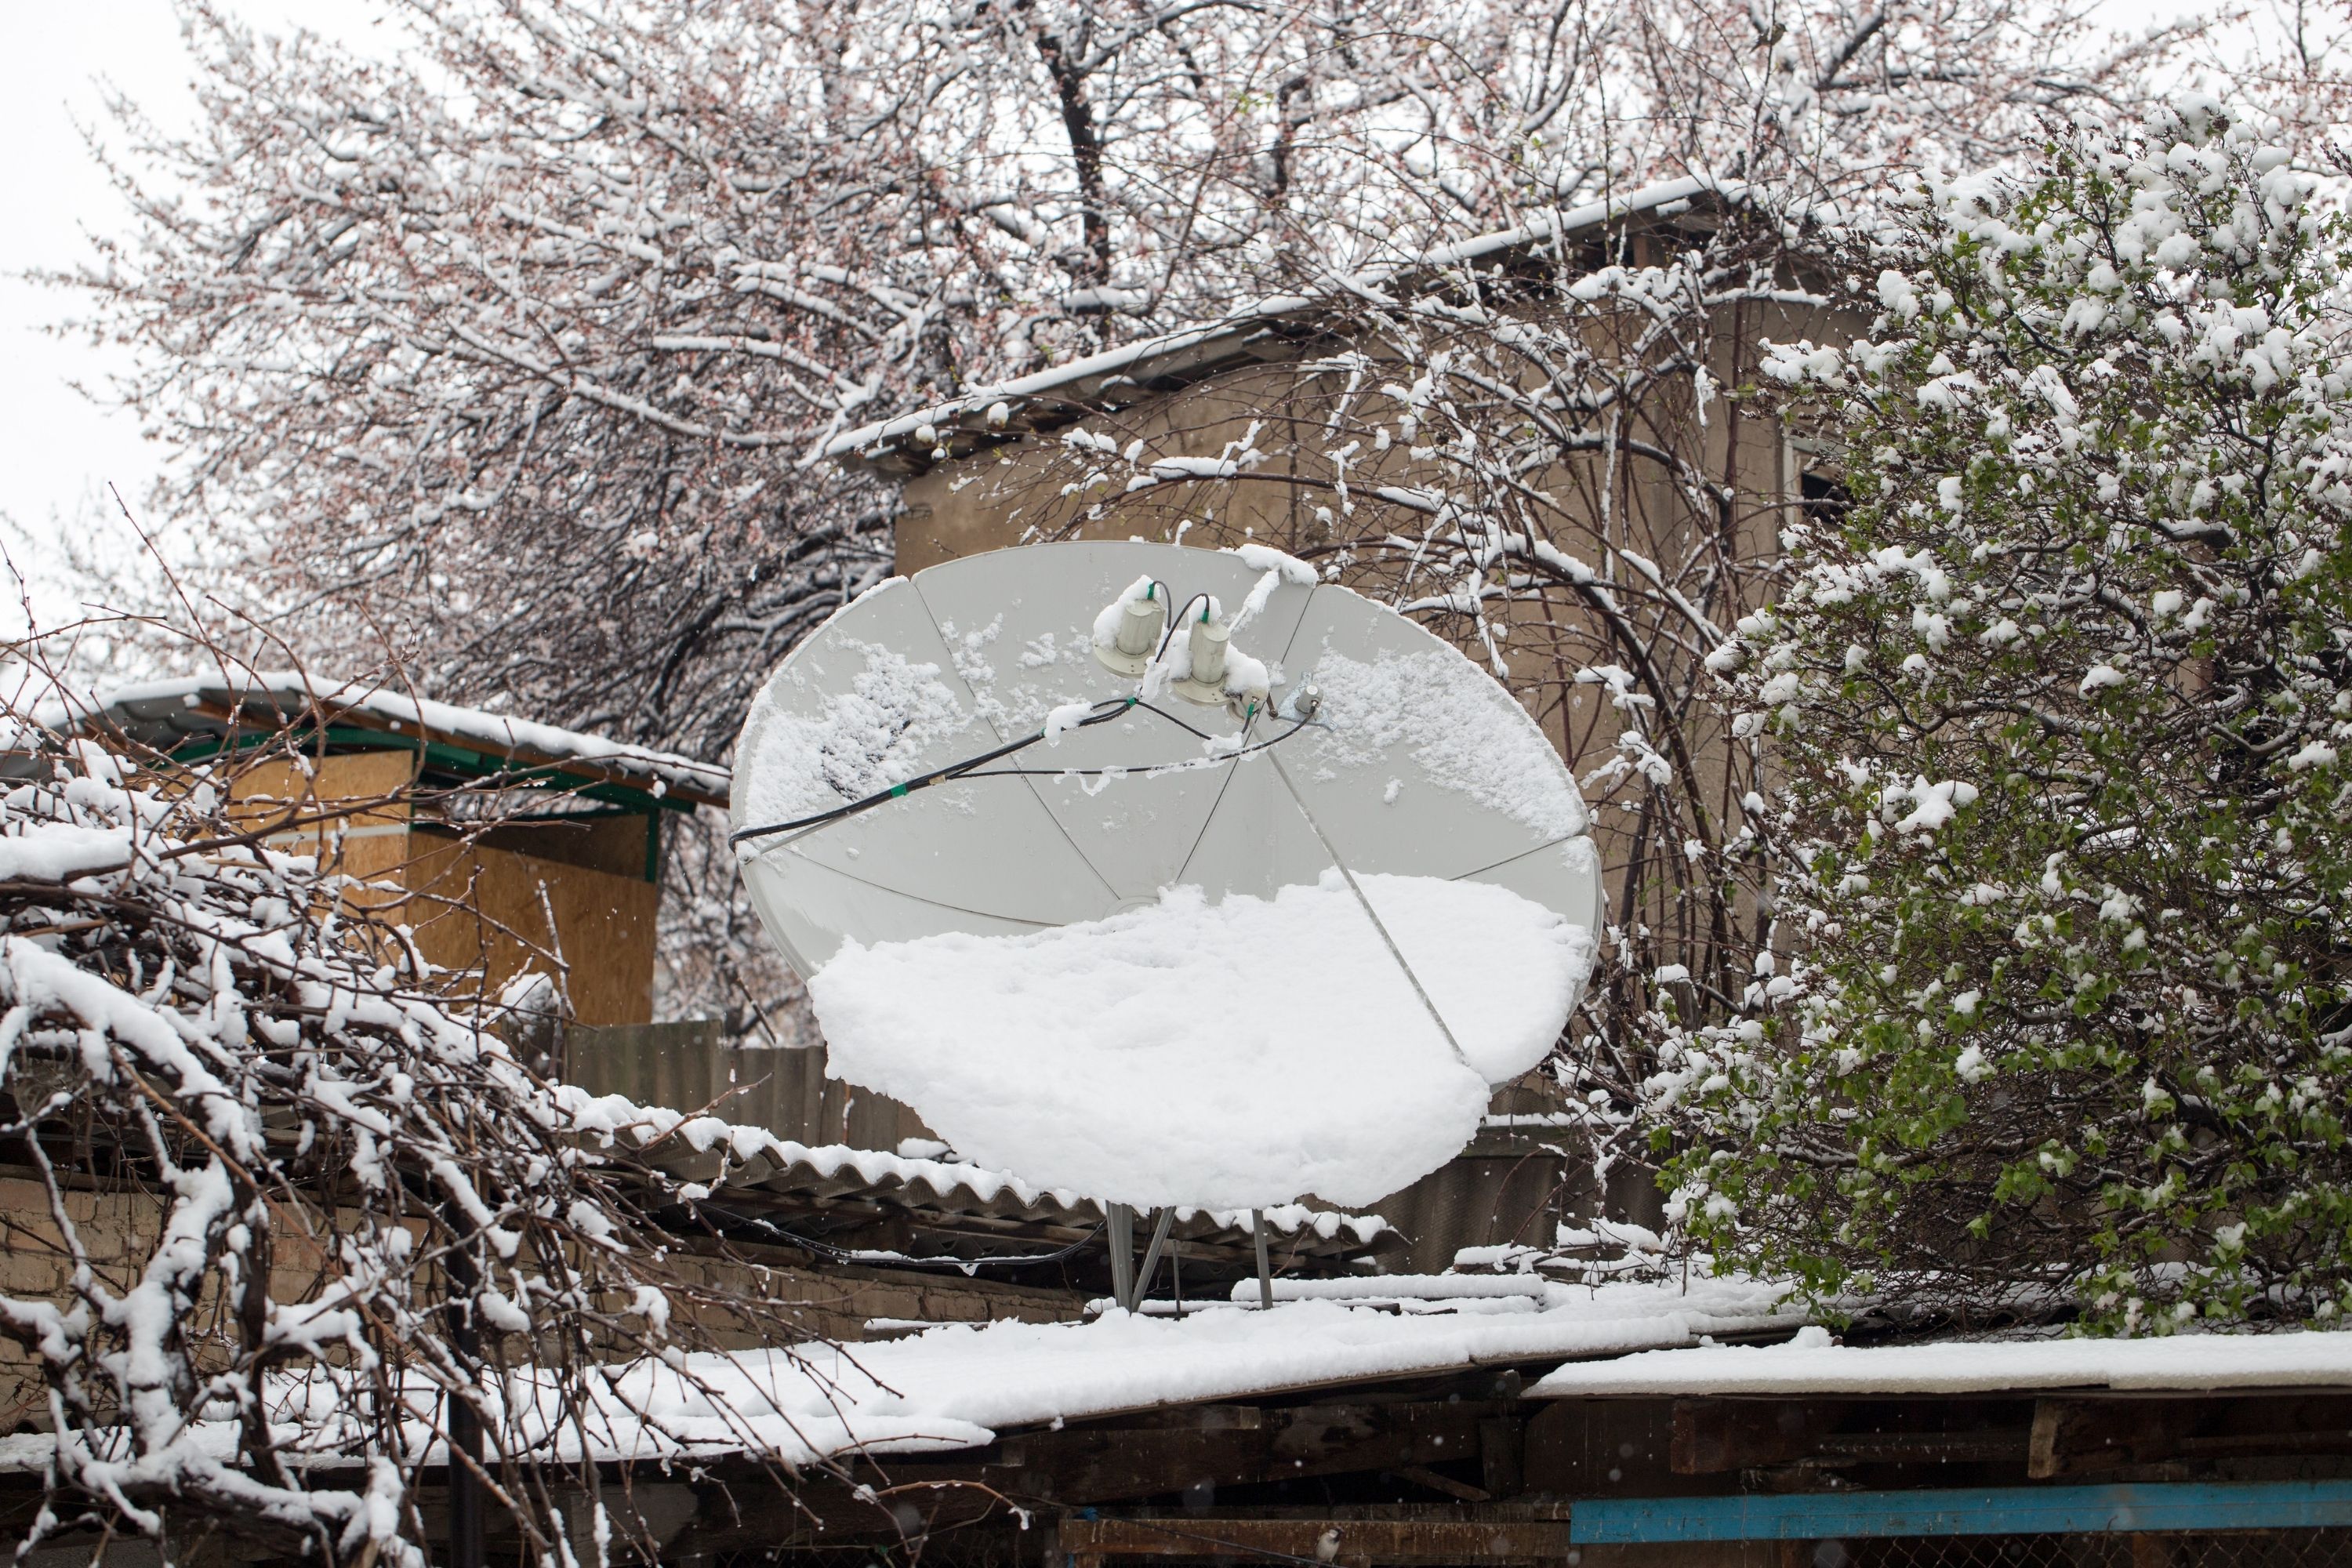 How to Keep Snow Off a Satellite Dish Using Heat Tapes